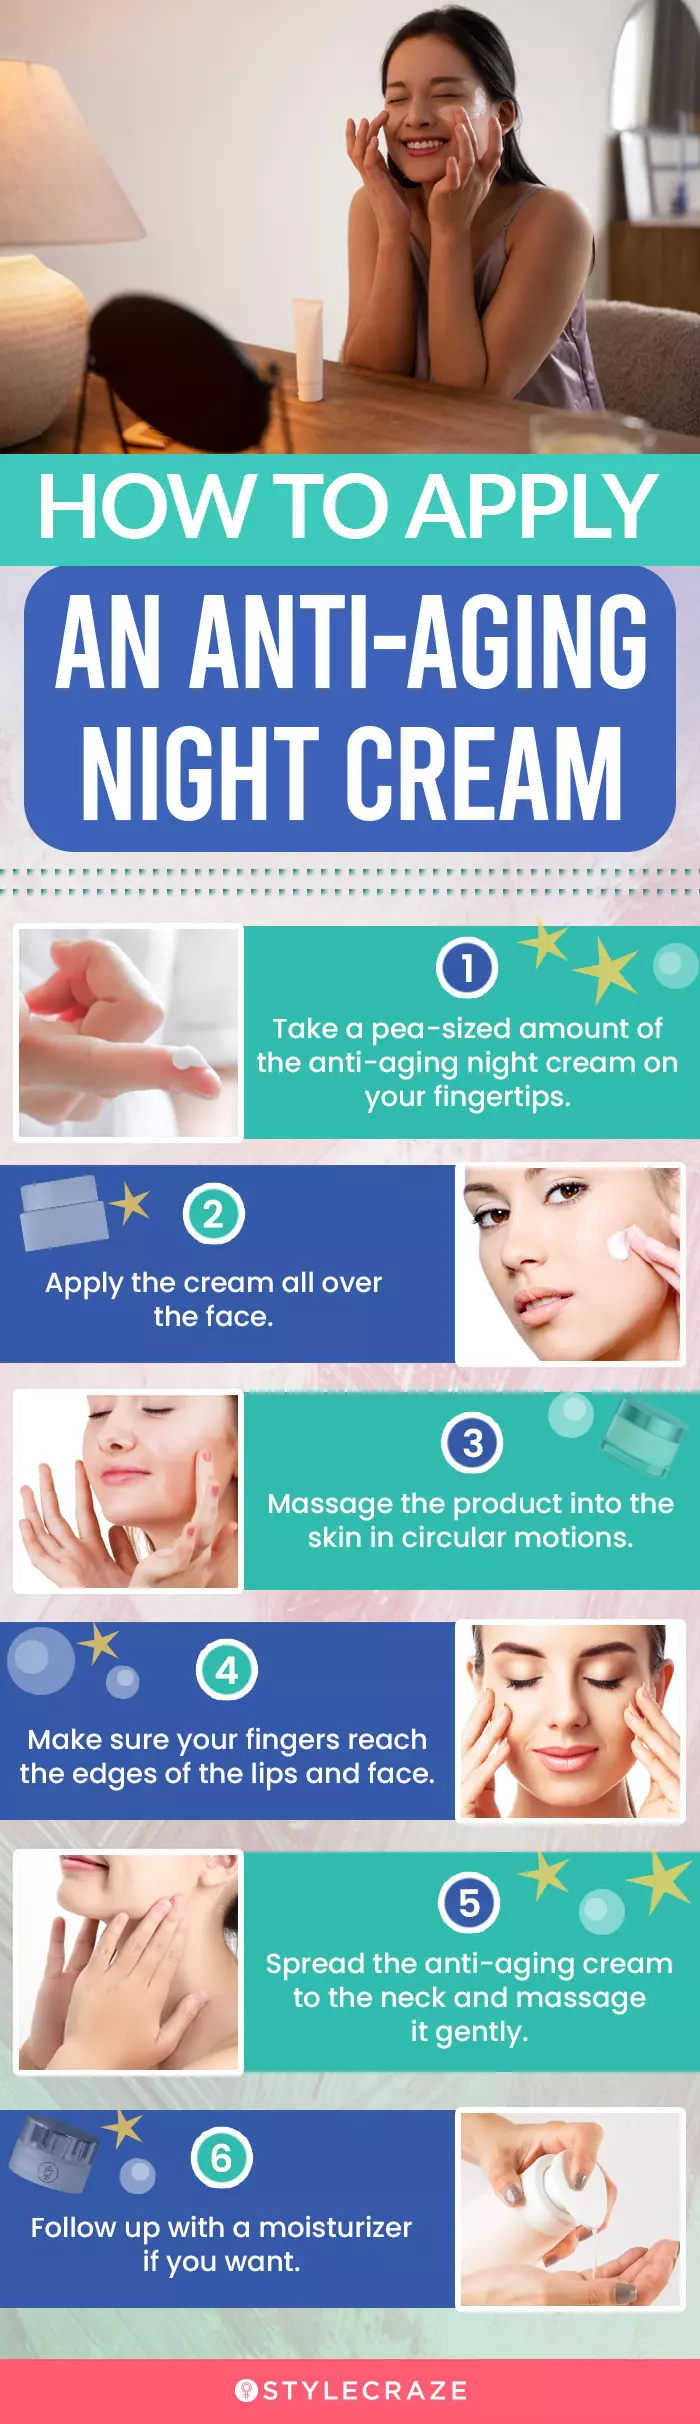 How To Apply An Anti-Aging Night Cream (infographic)